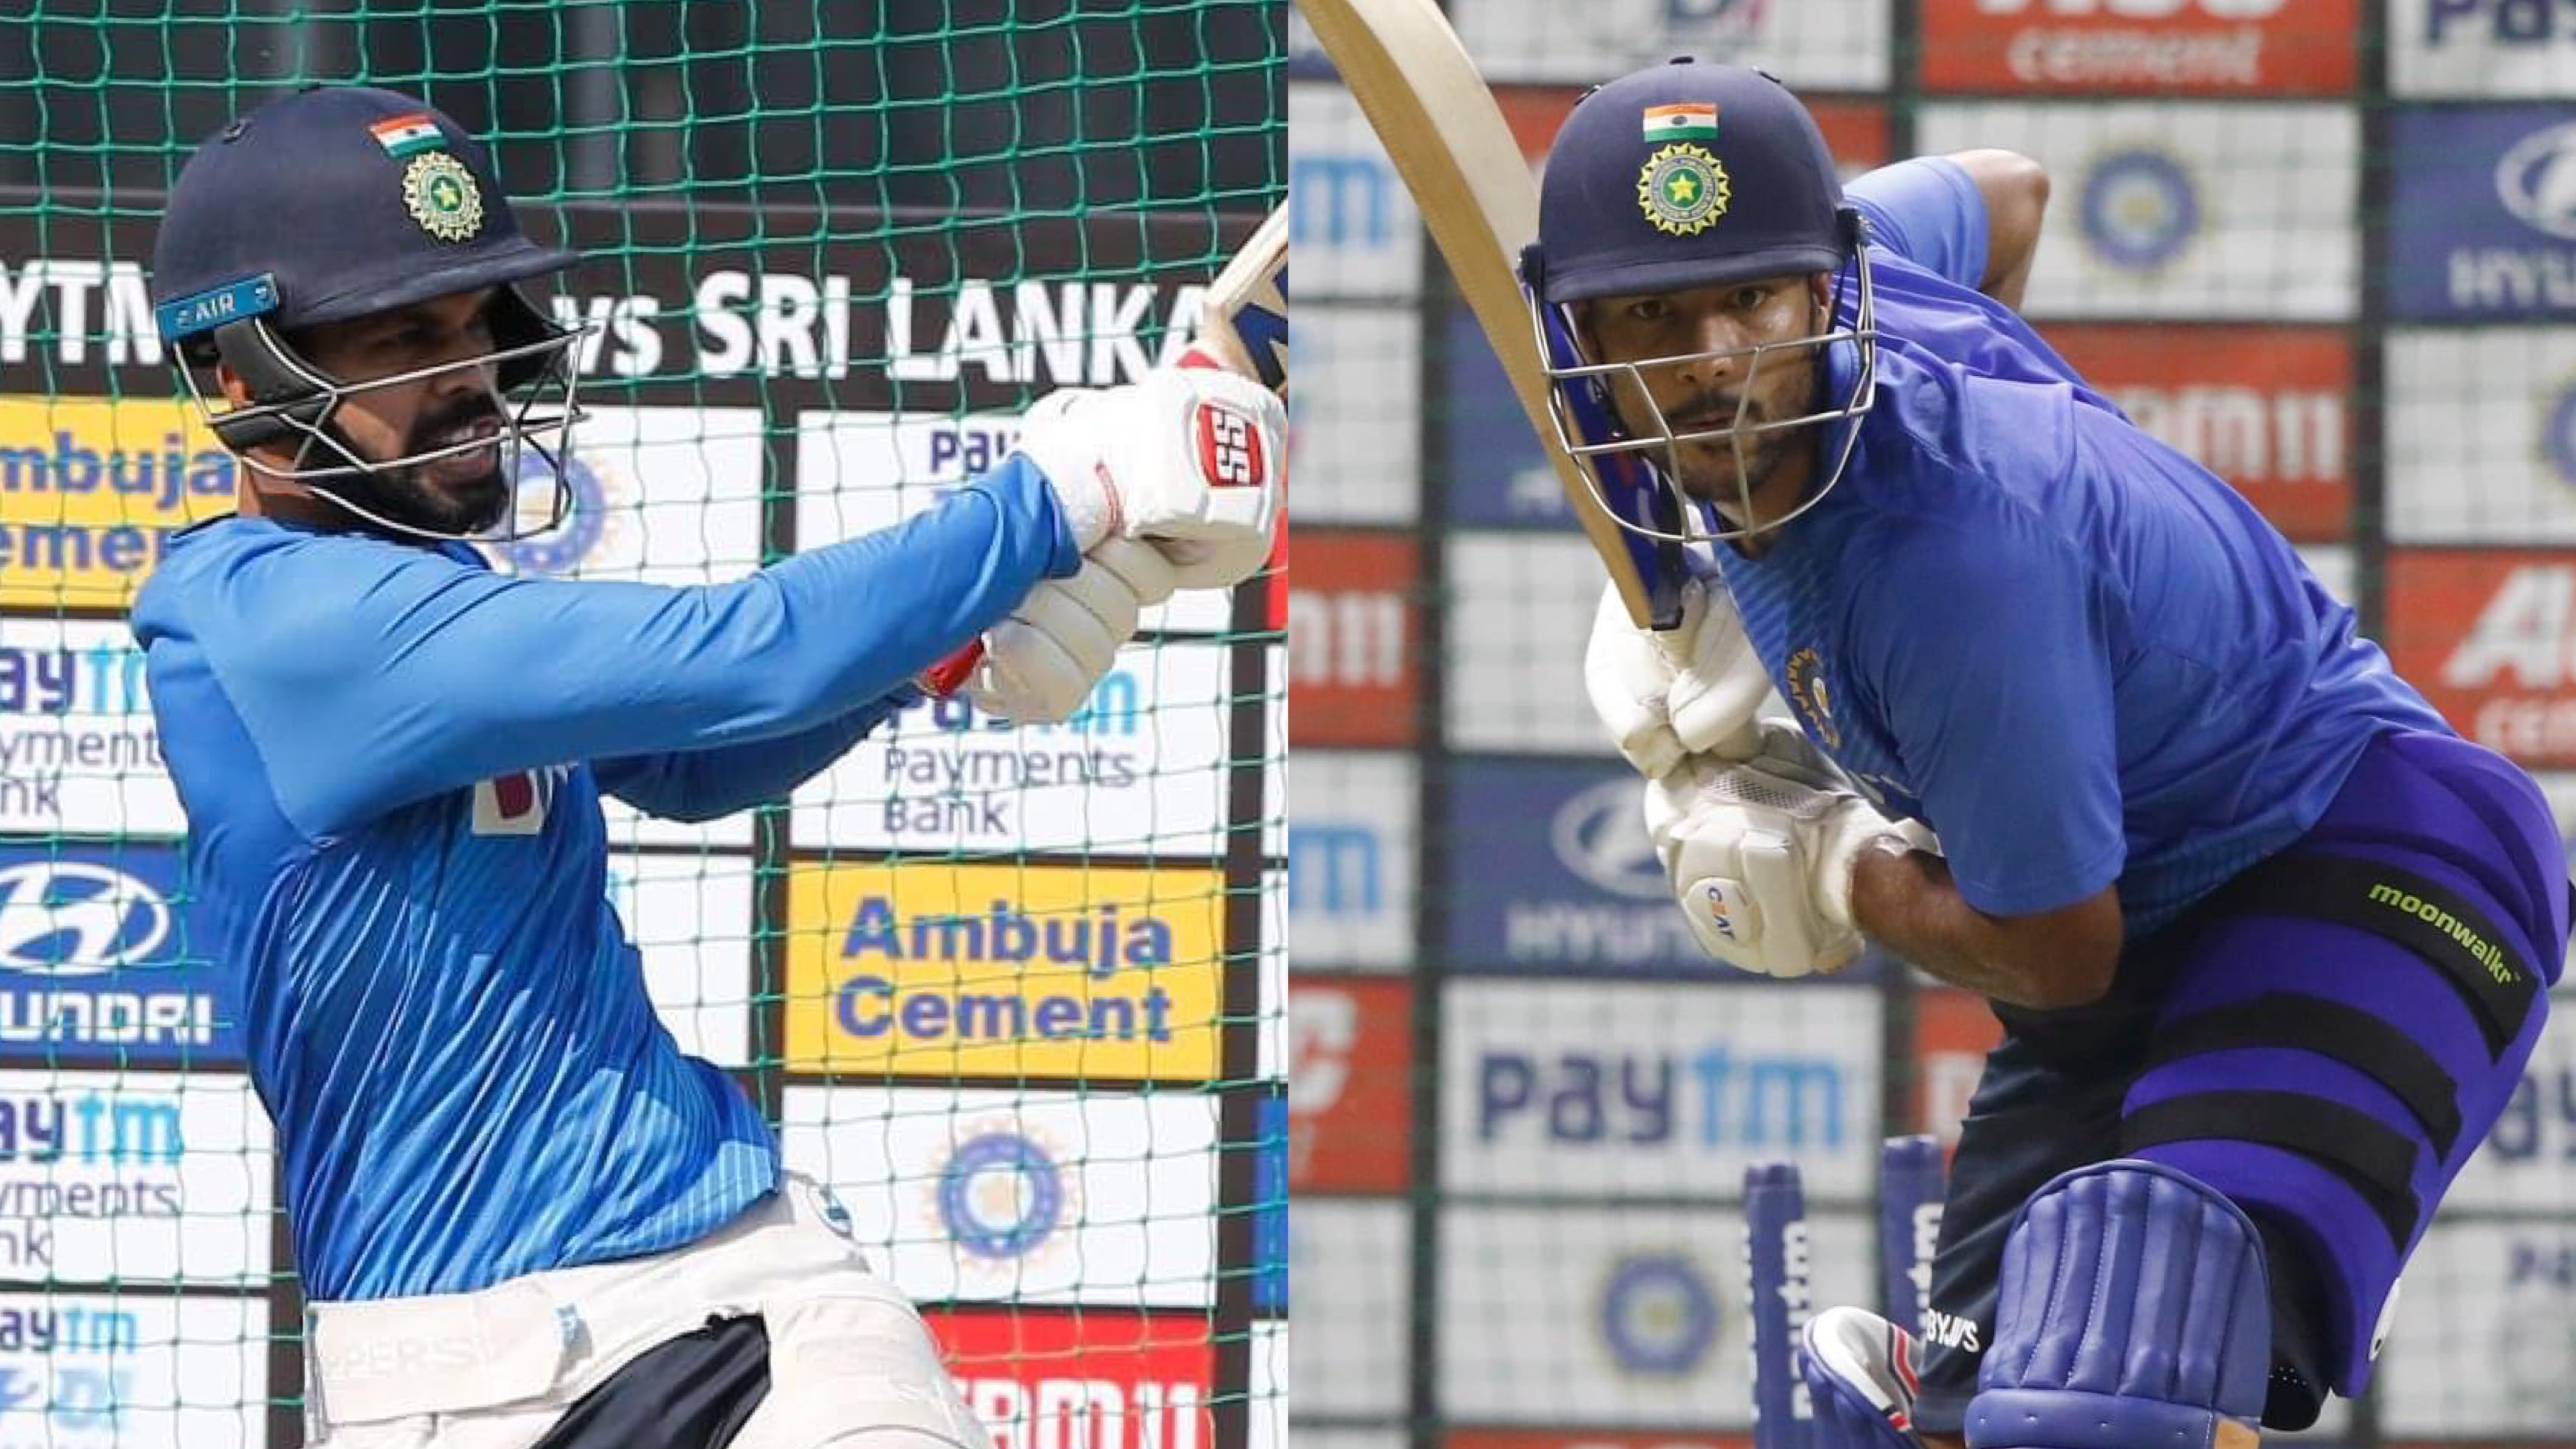 IND v SL 2022: Ruturaj Gaikwad ruled out of T20I series; Mayank Agarwal added to squad - Report